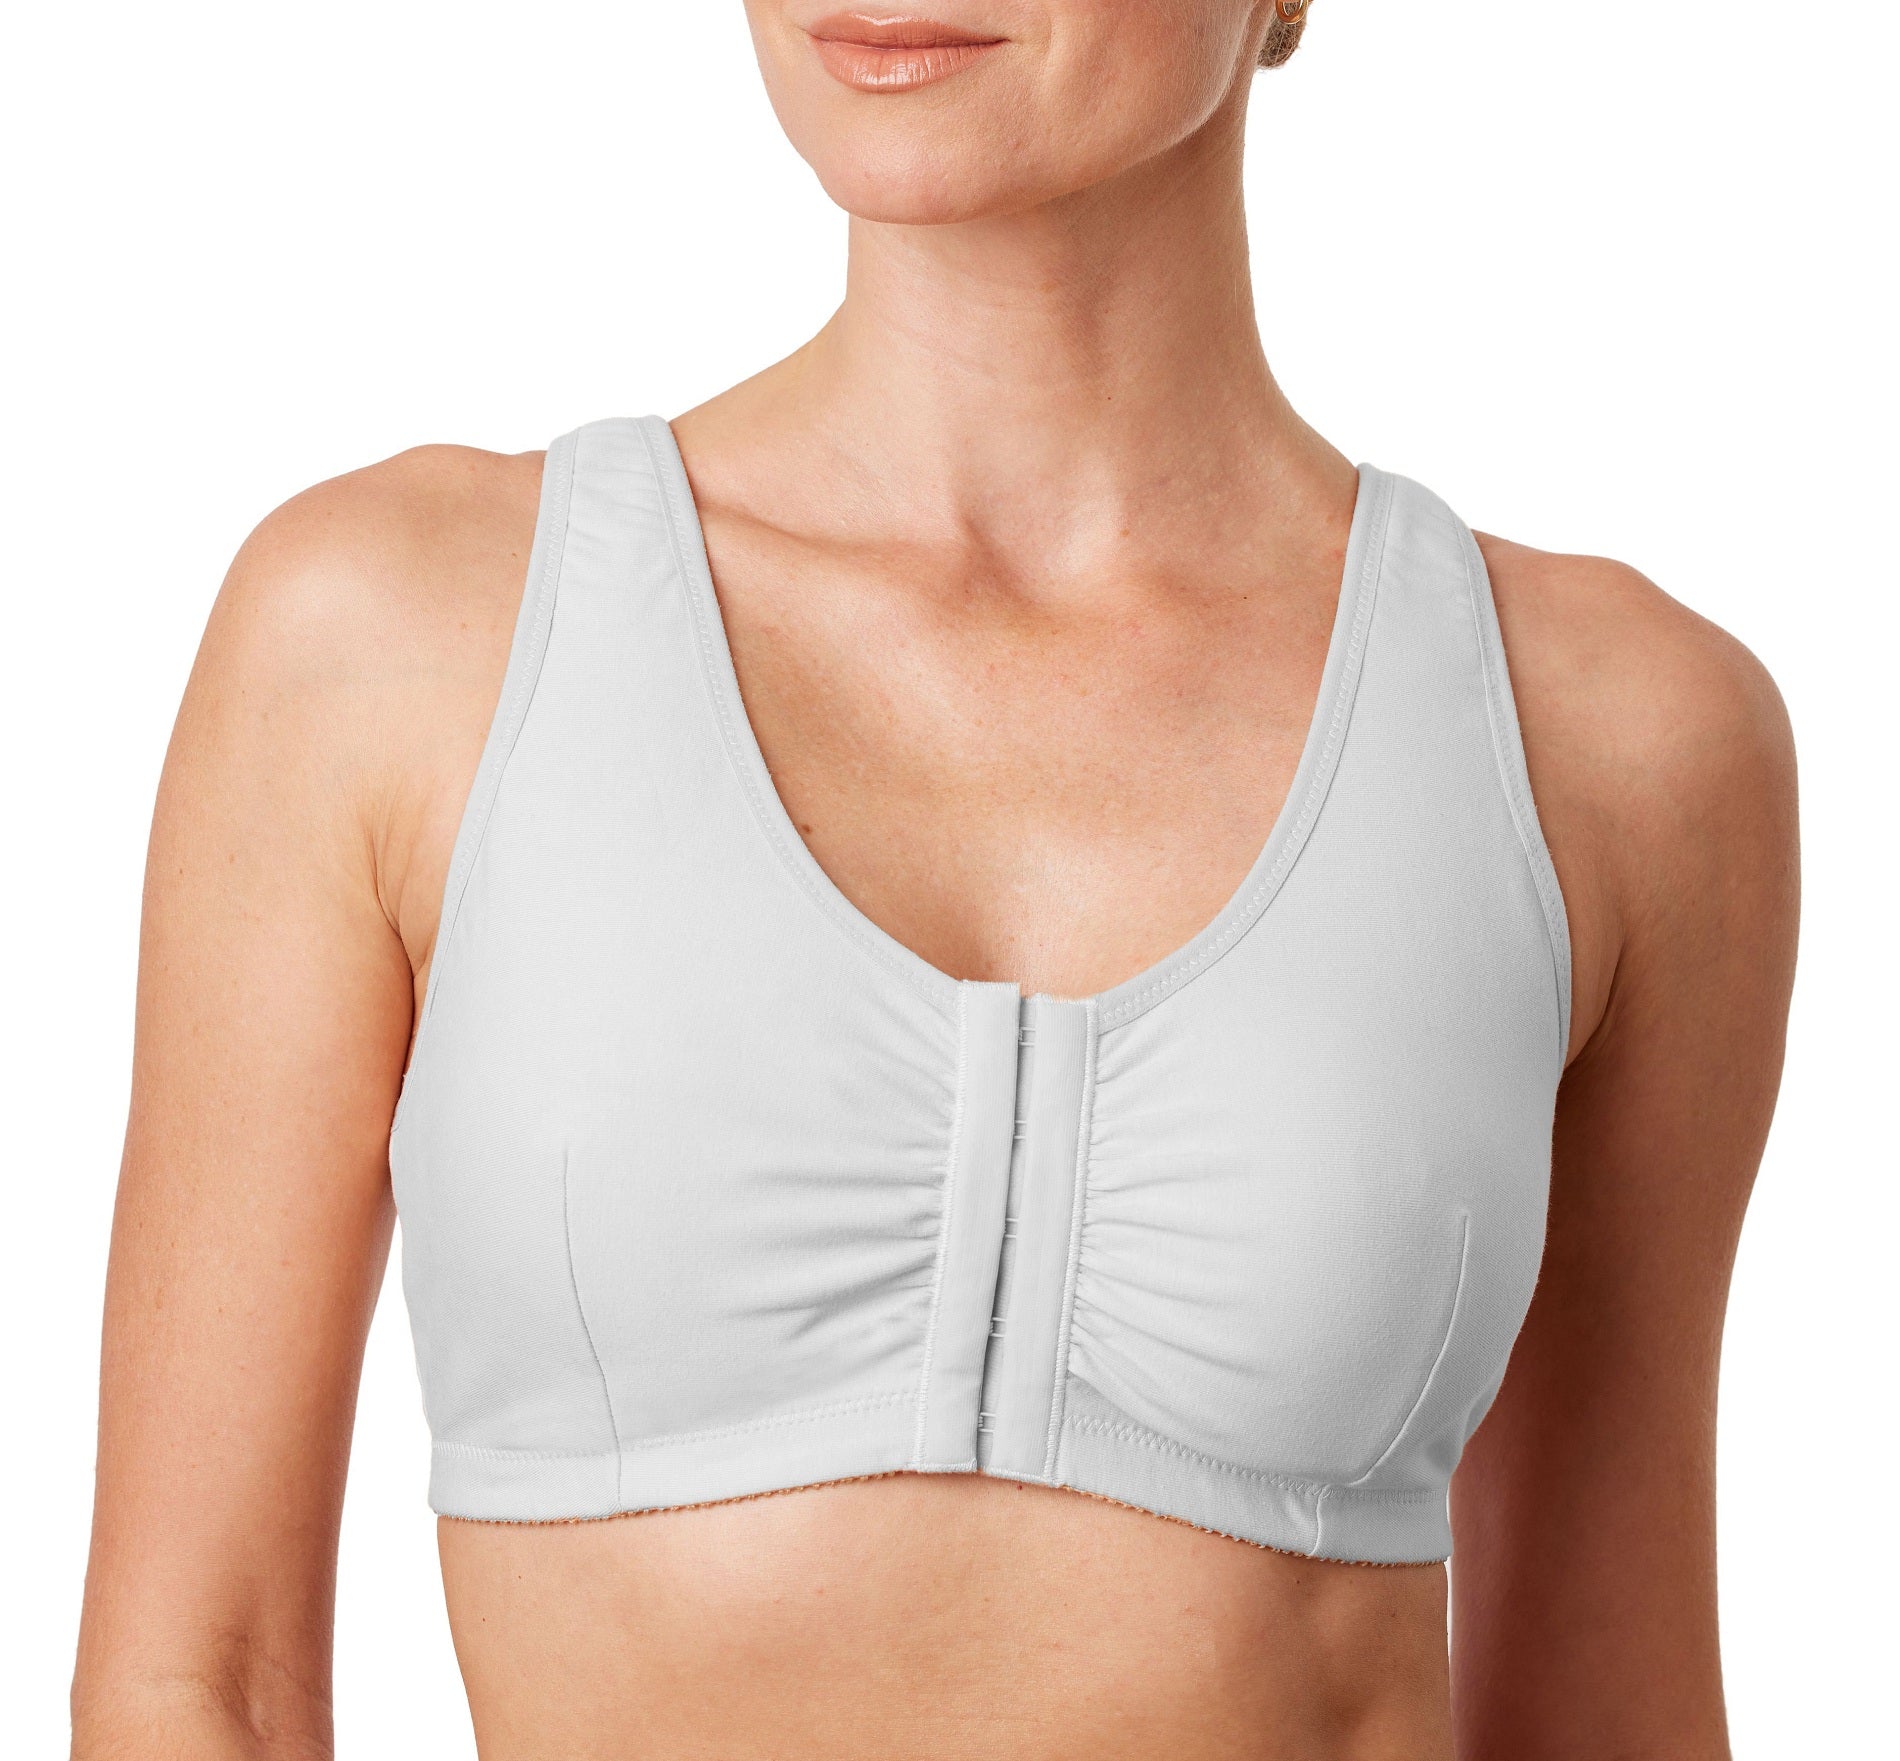 Alessandra B Mastectomy Bras with Pockets for Prosthesis, Black